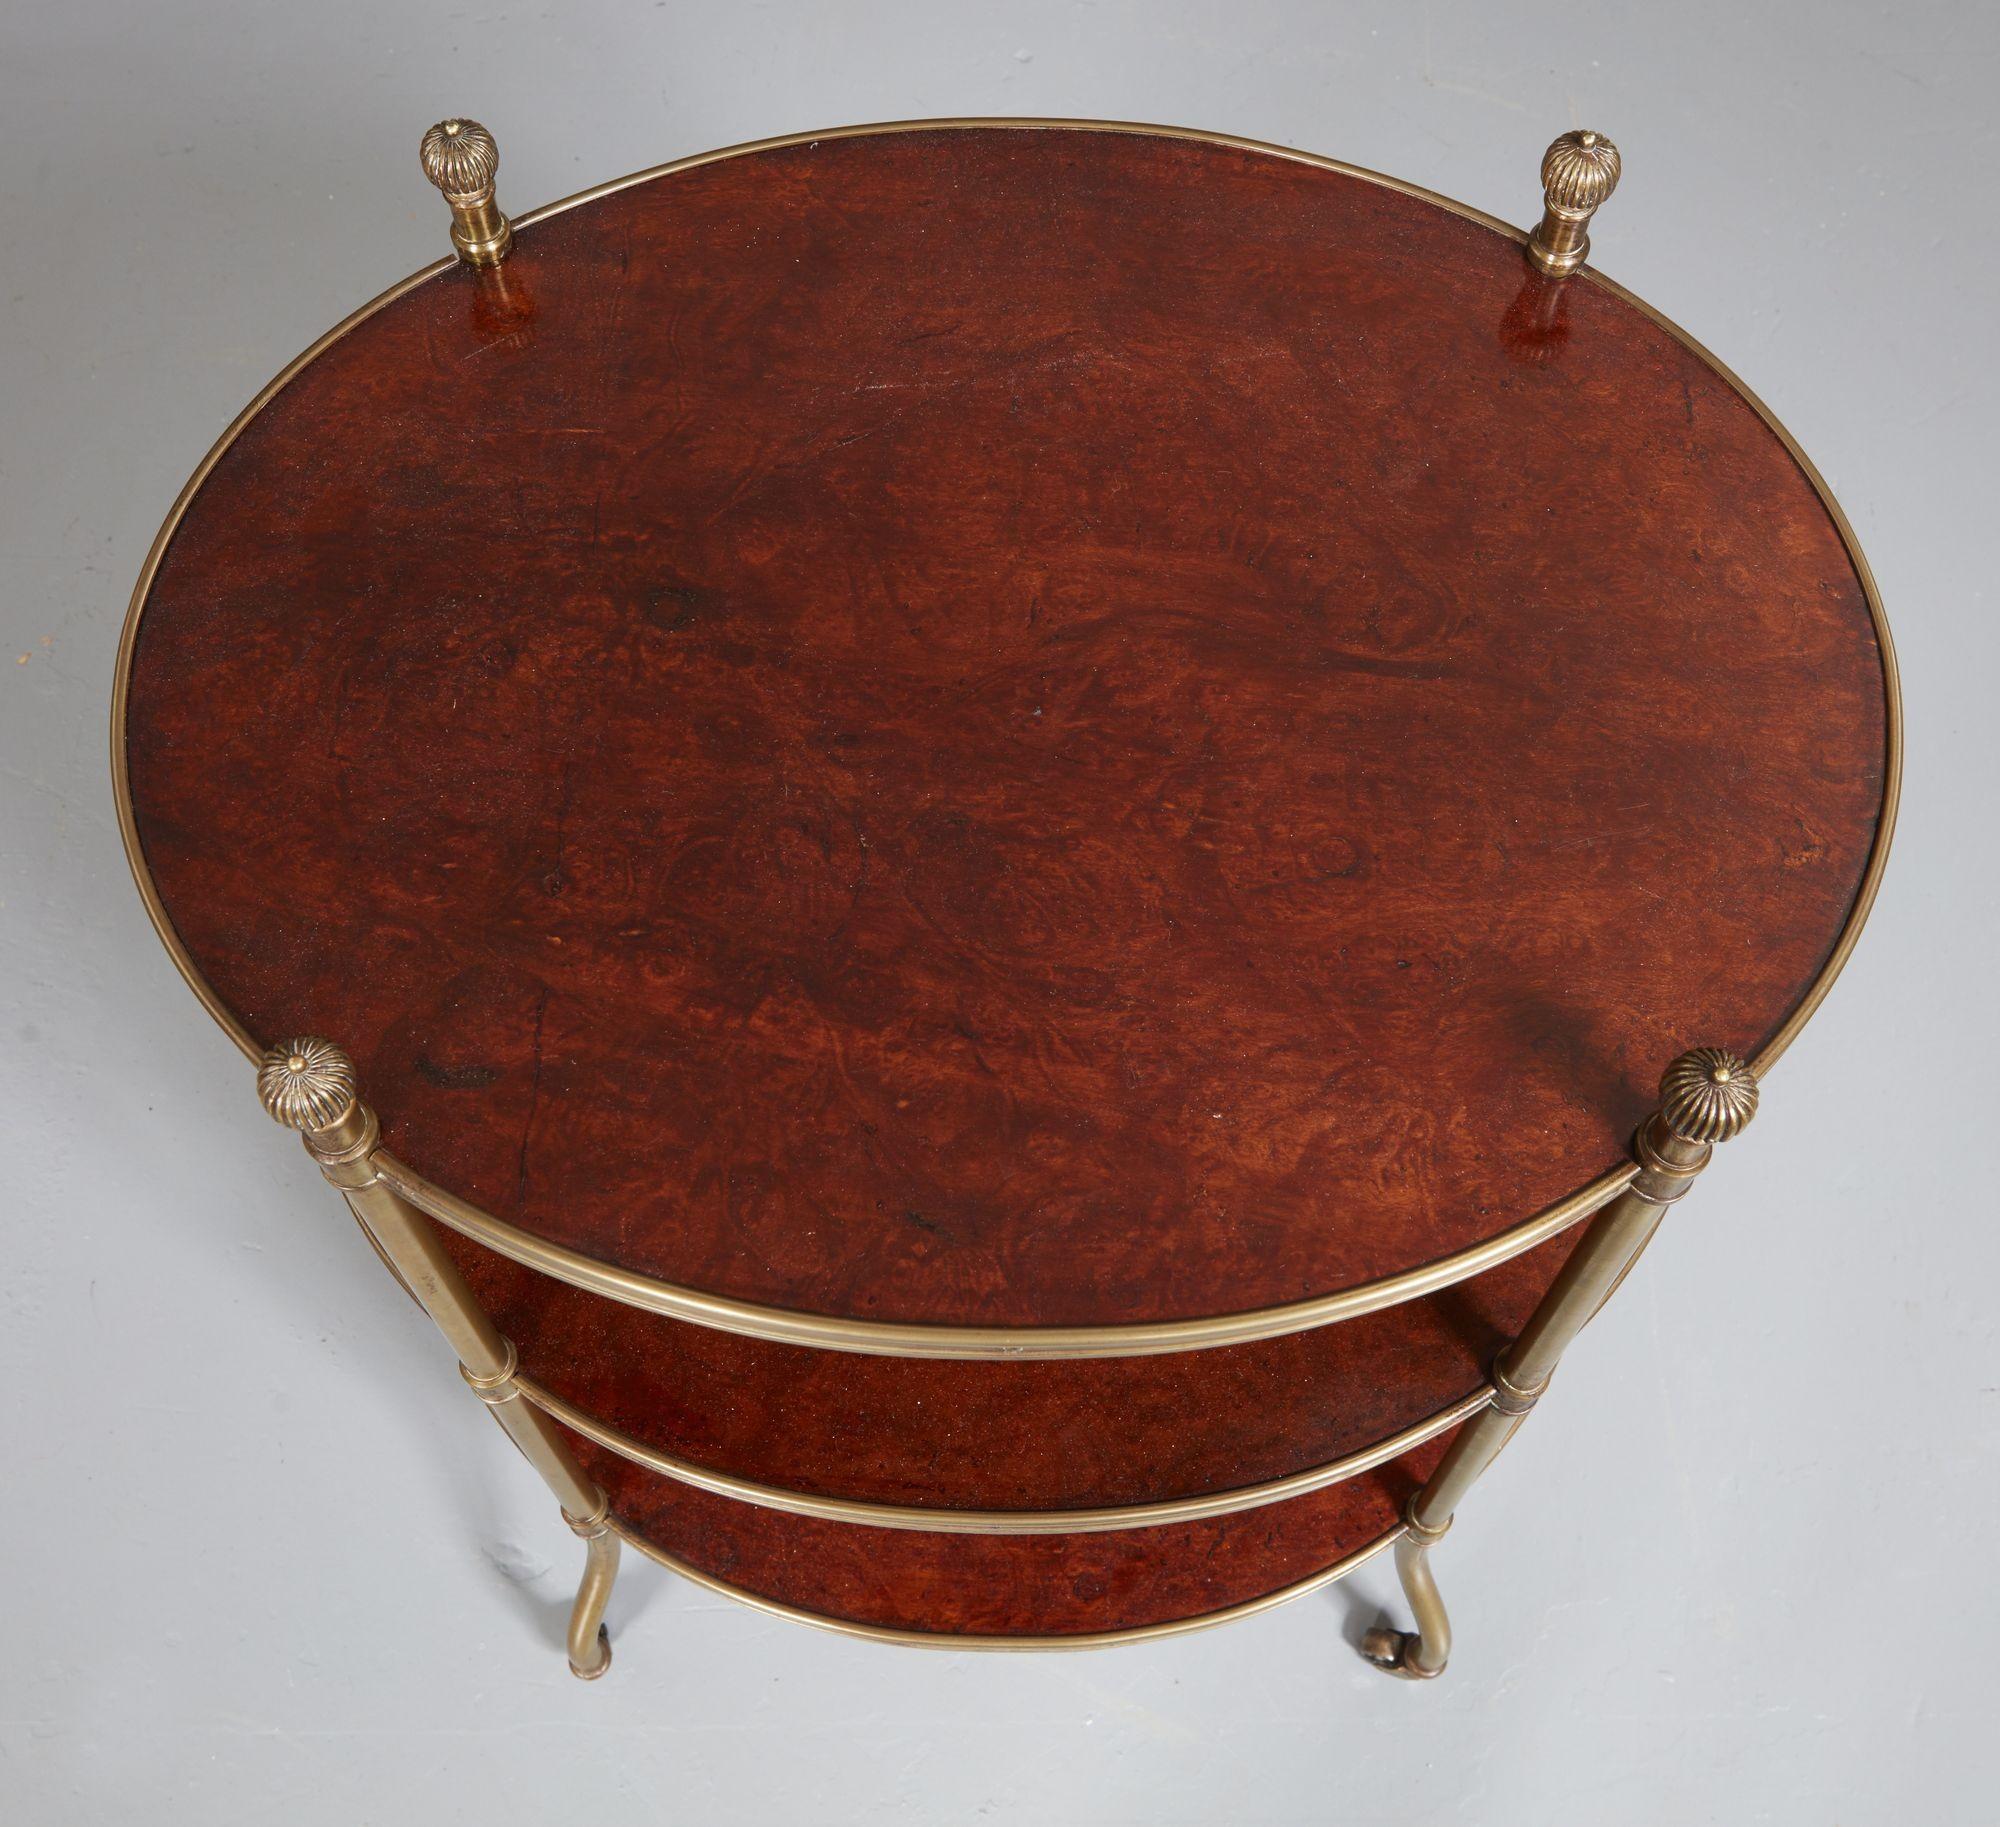 Brass Early 19th C. English Campaign Plum Pudding Tiered Table